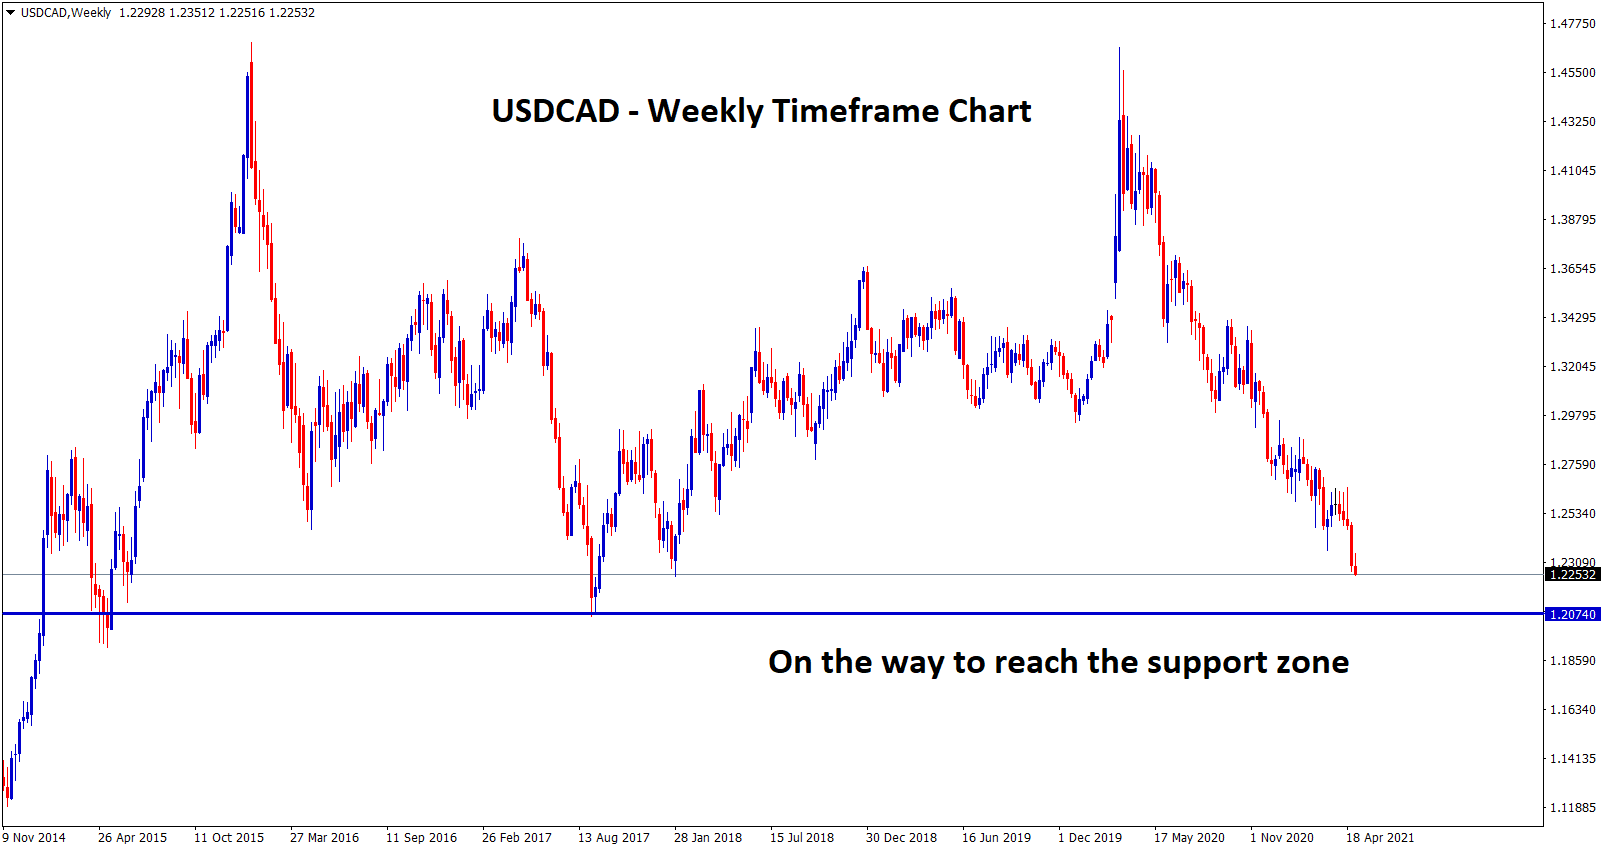 USDCAD on the way to next support 1.20